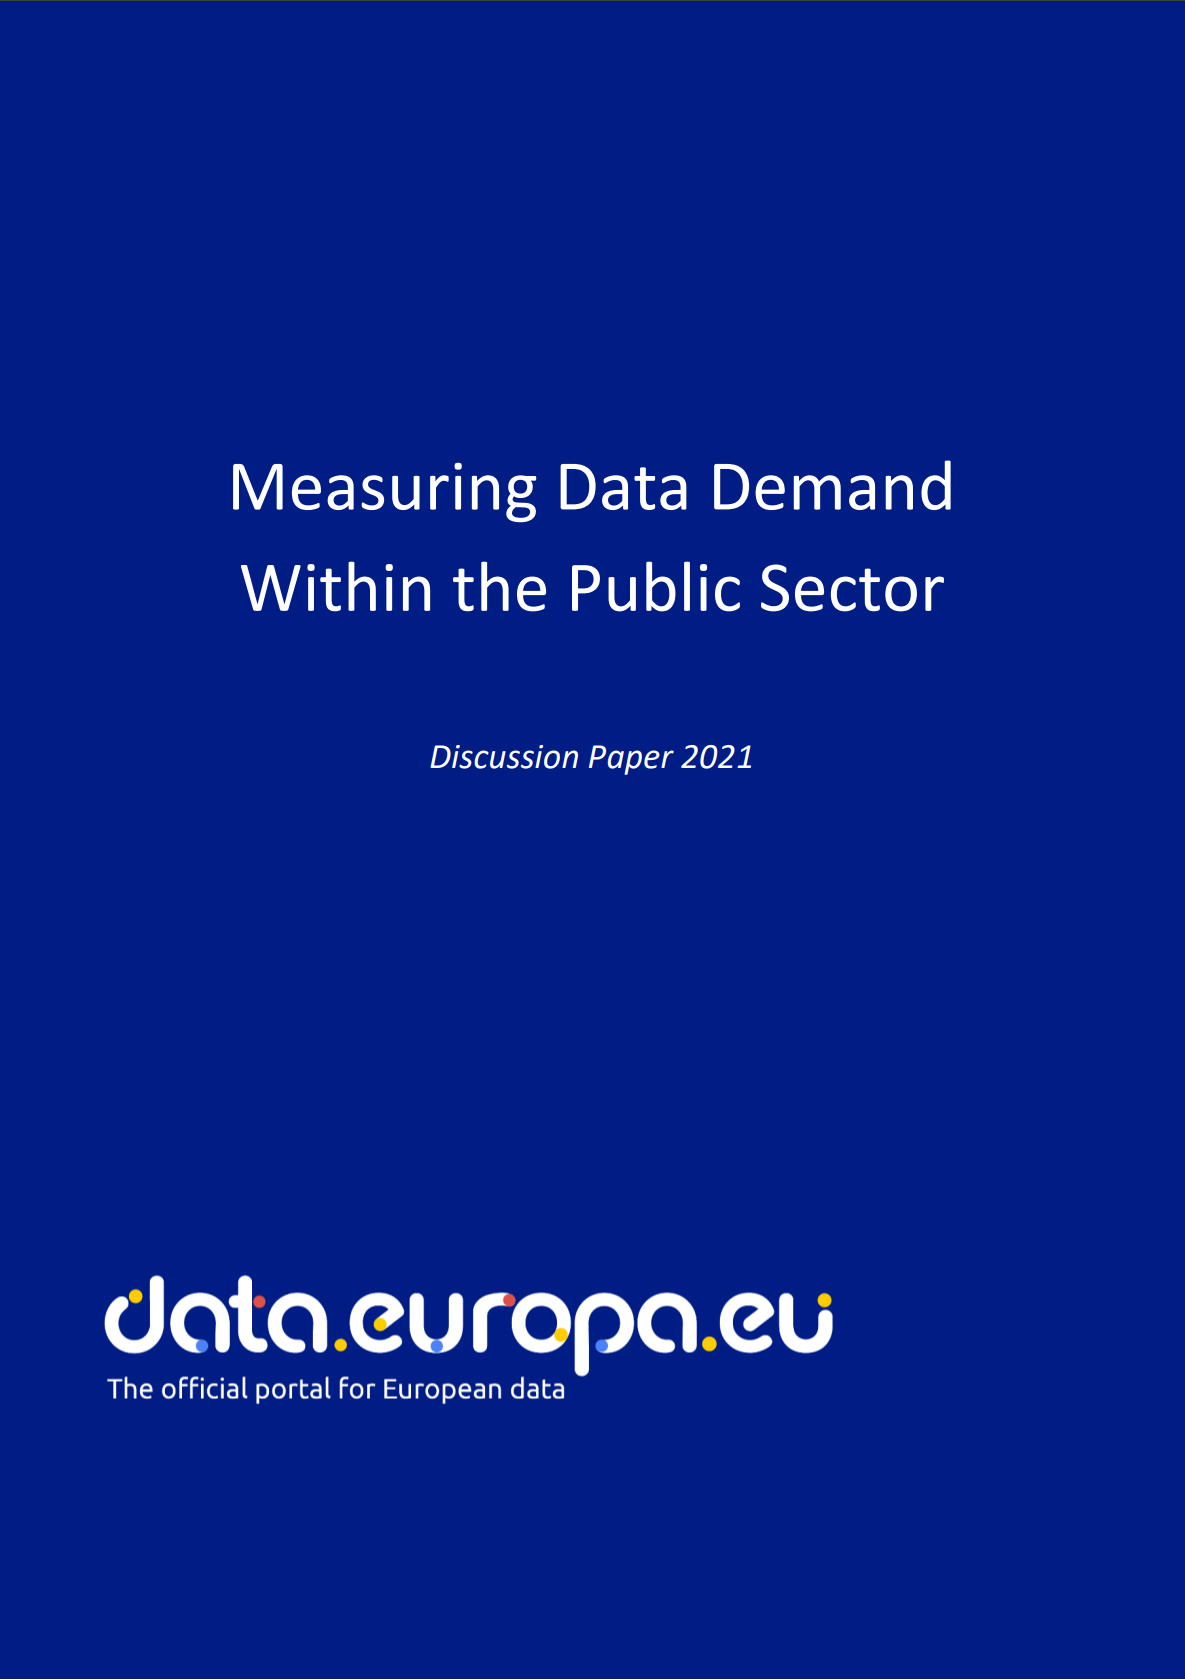 Measuring data demand within the public sector